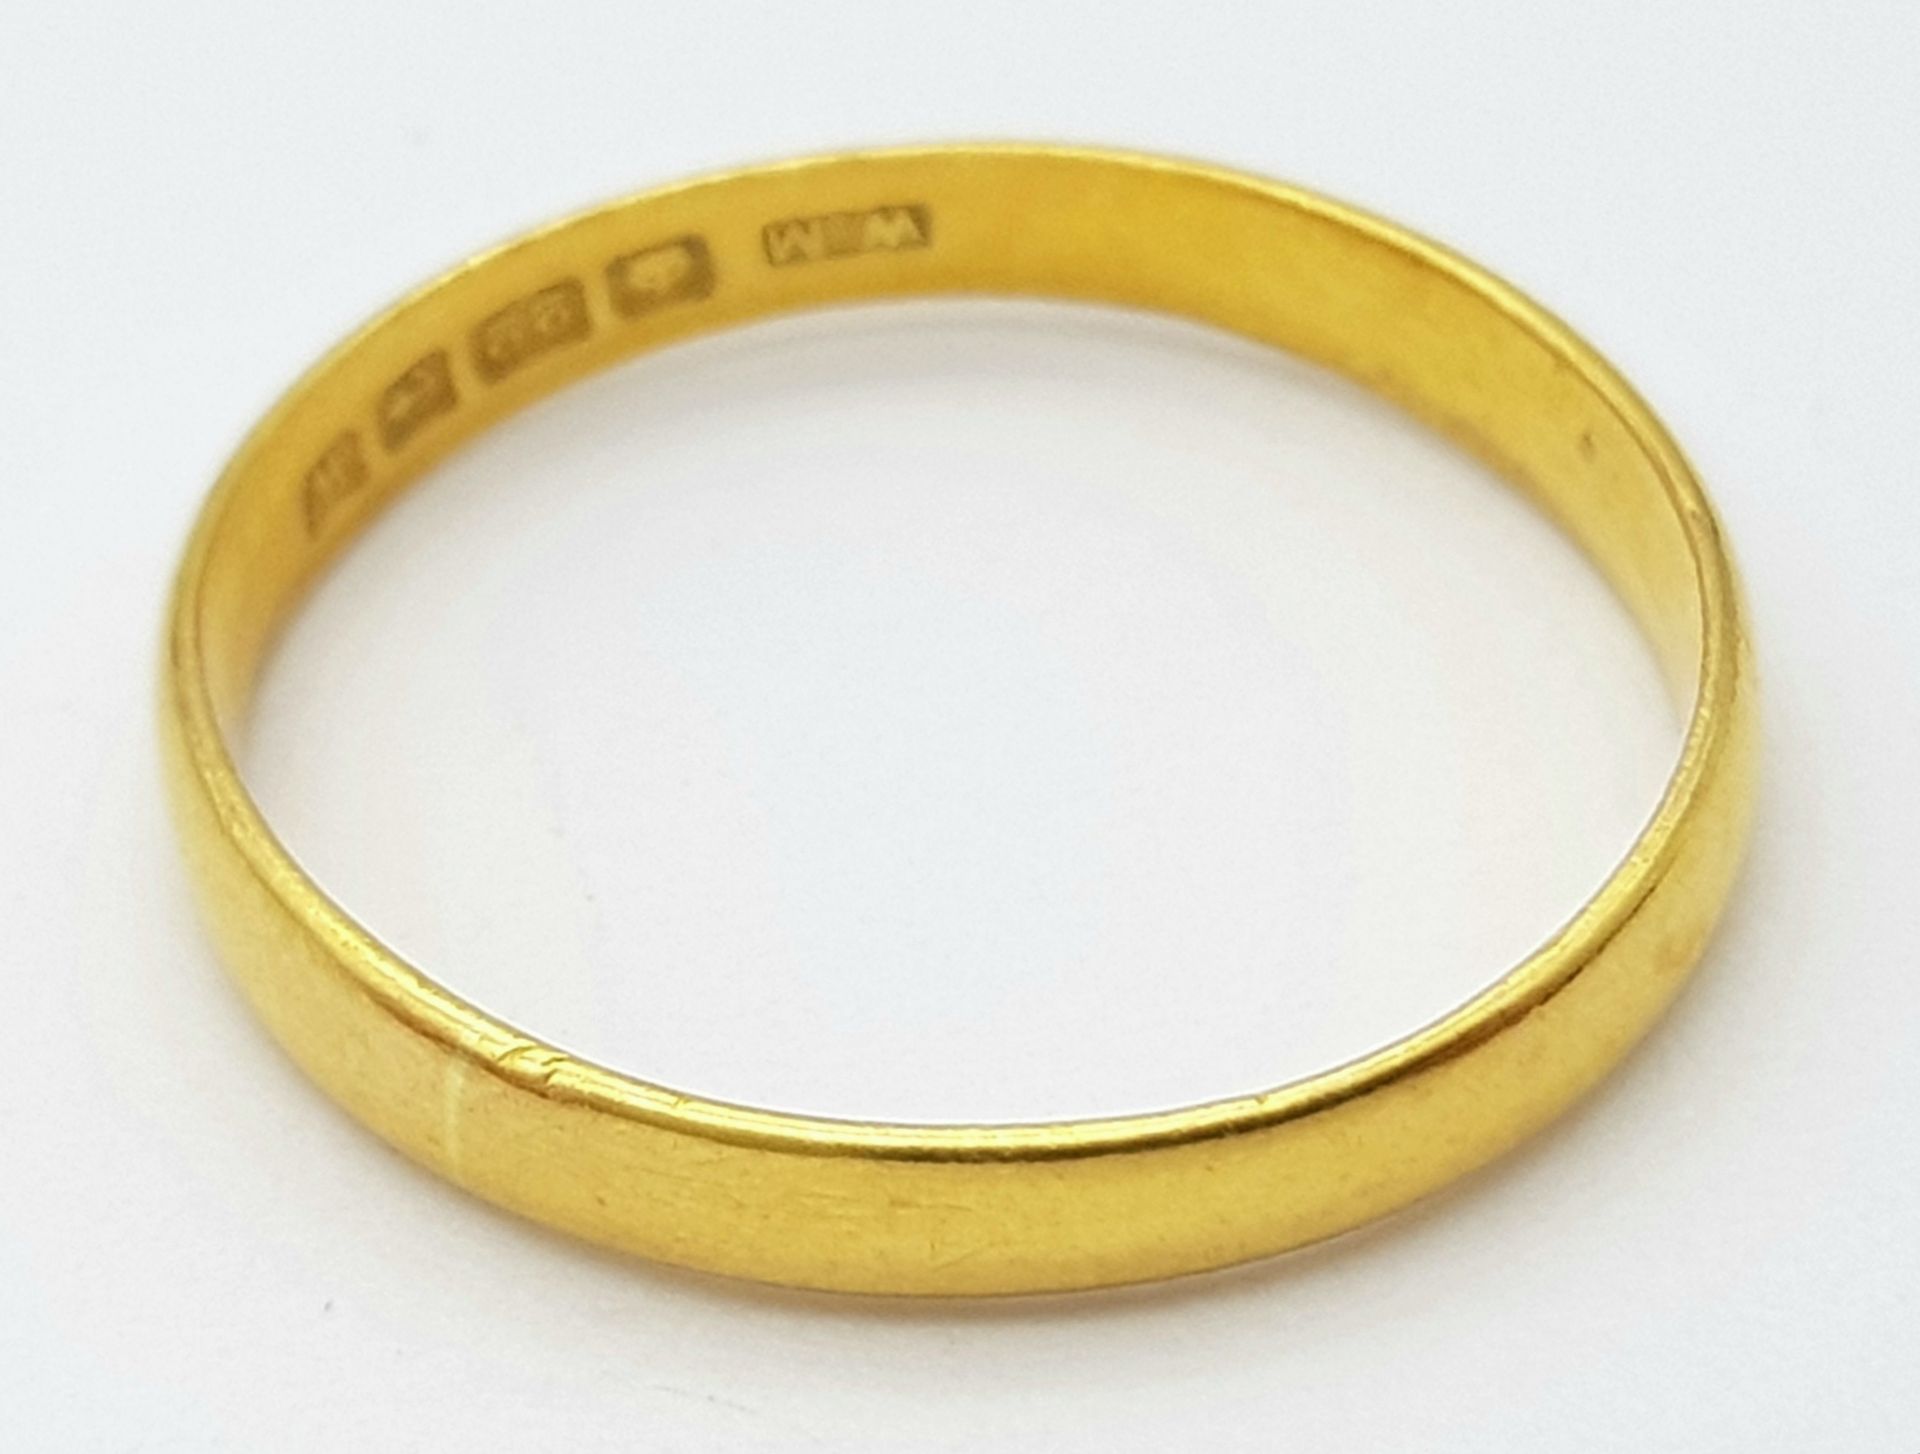 A 22 K yellow gold convex band ring, size: O, weight: 2.4 g. - Image 3 of 4